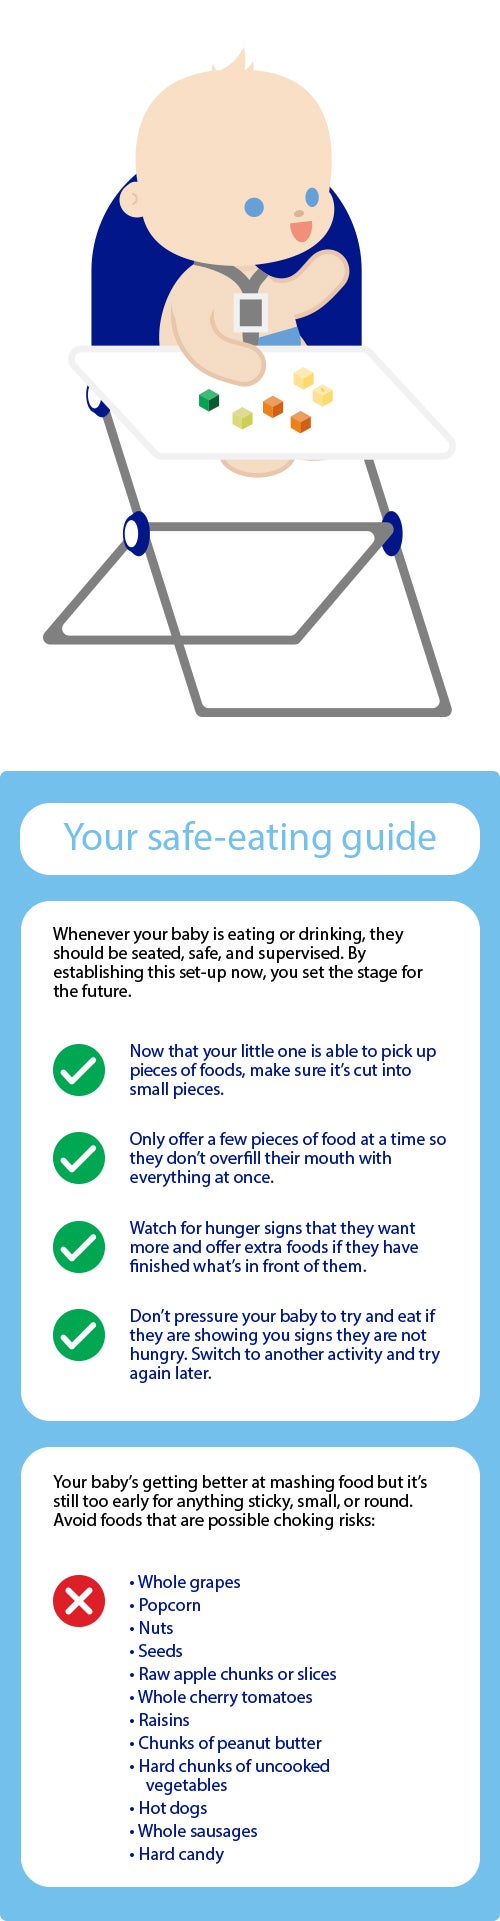 baby safe eating guide